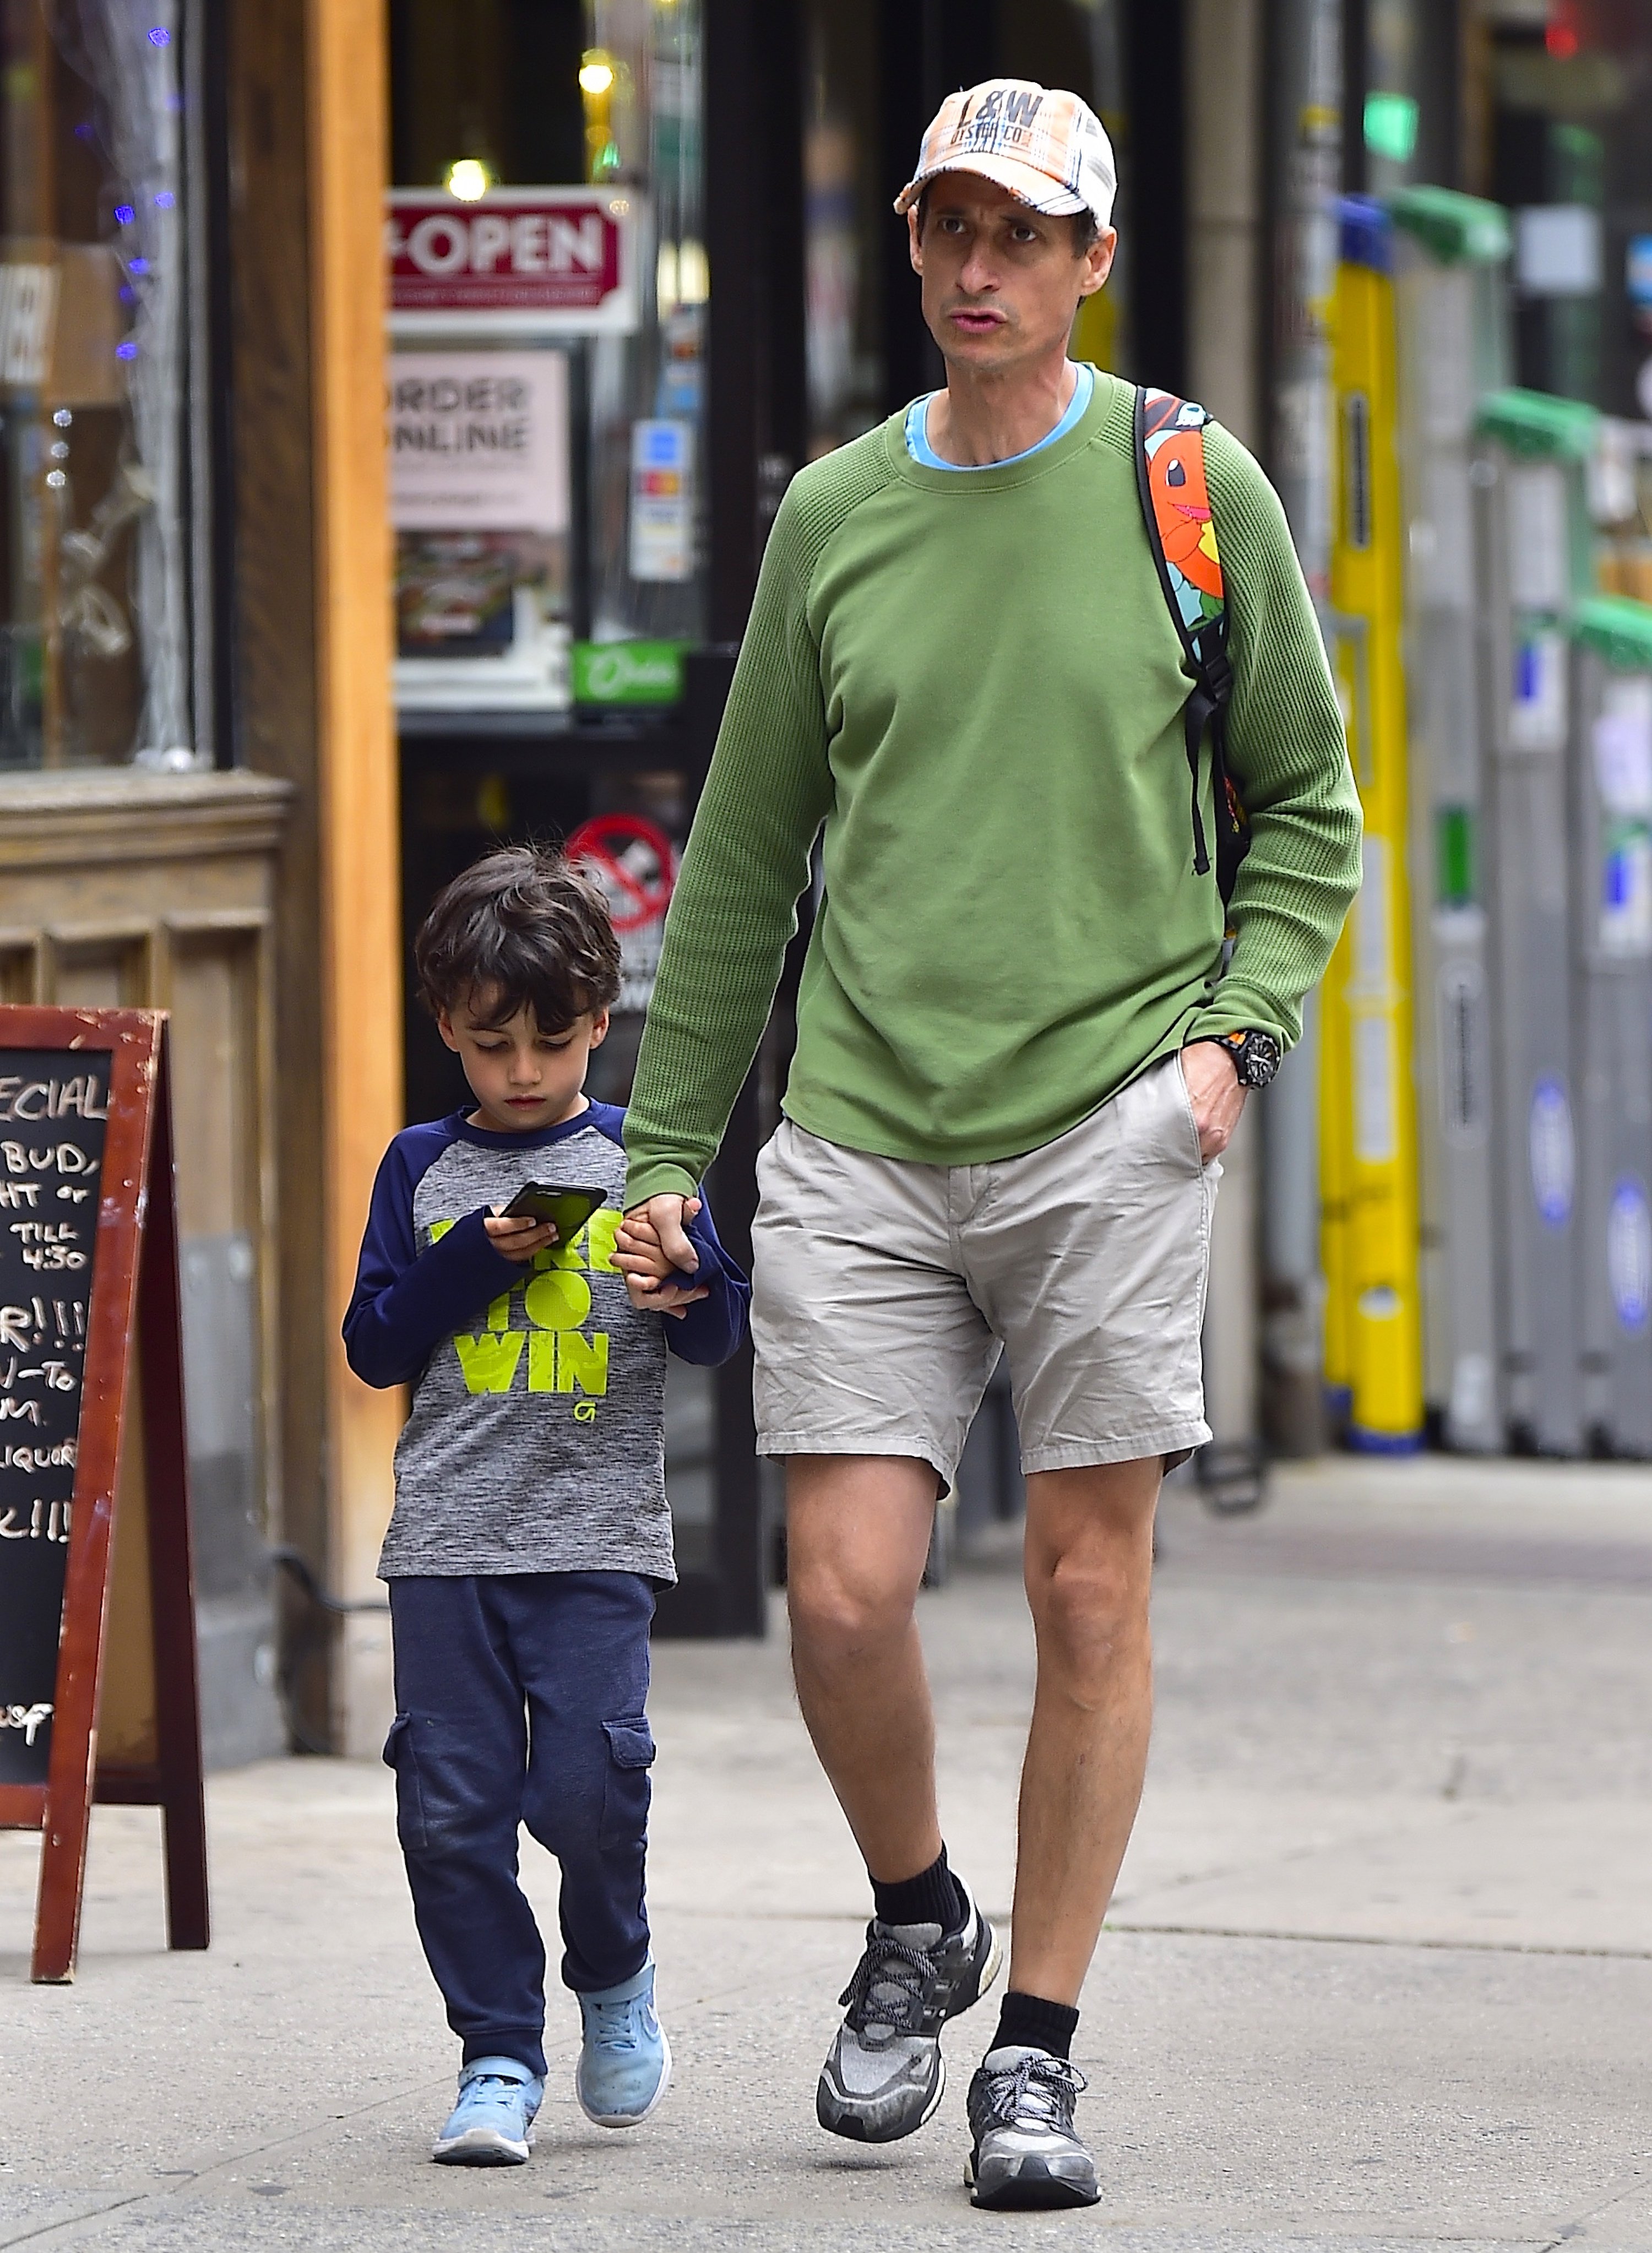 Anthony Weiner (R) and son Jordan Zain Weiner are seen in Chelsea on June 5, 2017 in New York City. | Source: Getty Images